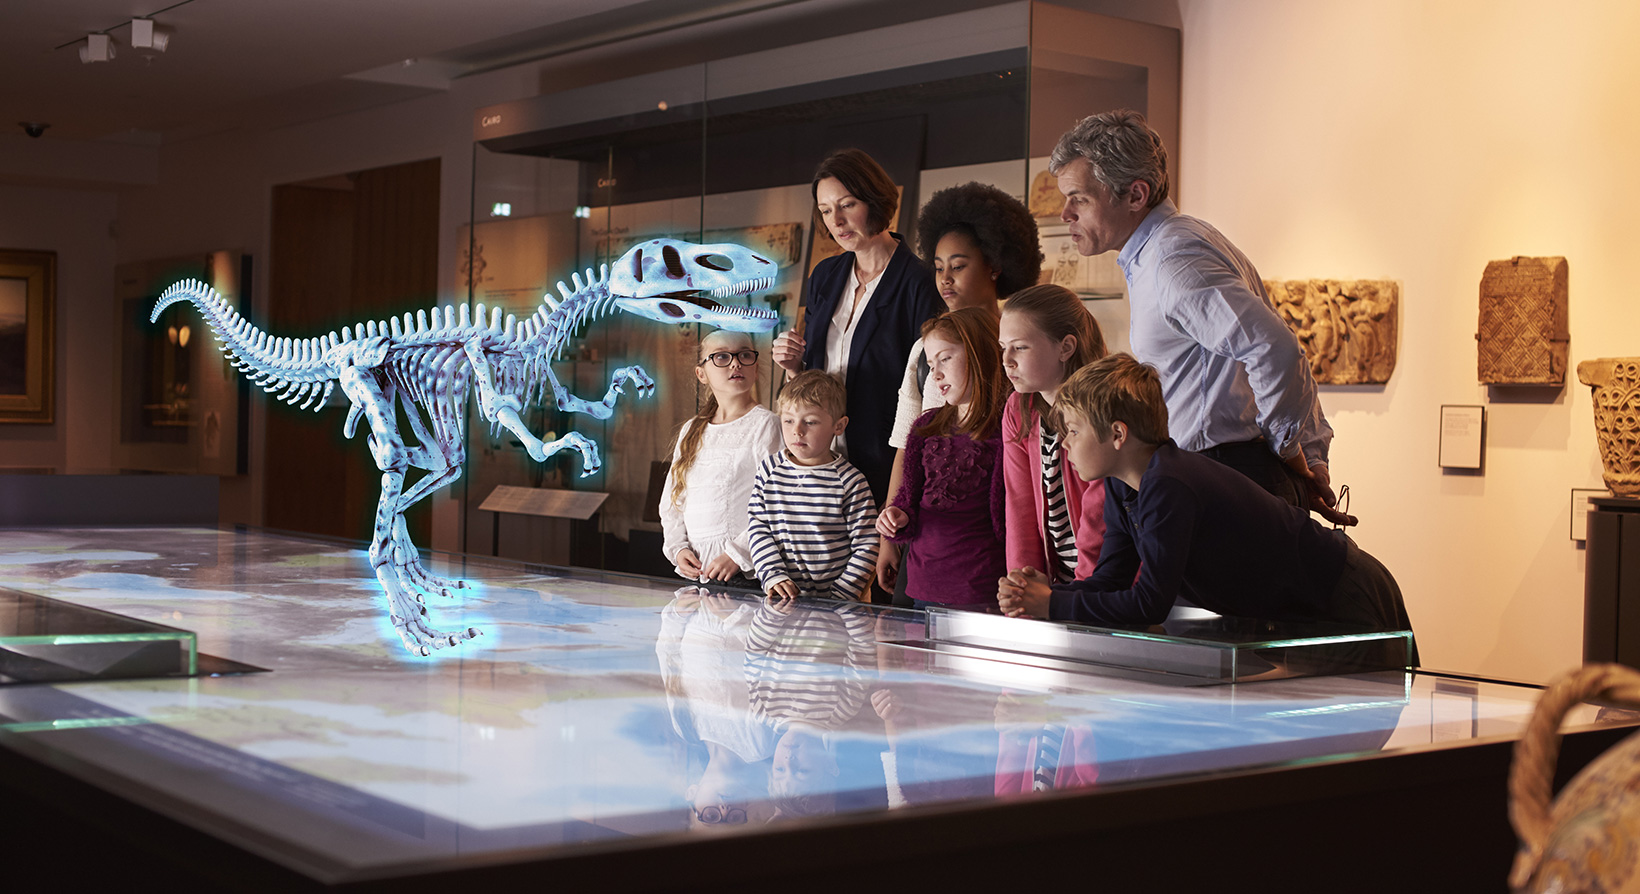 group of people at museum seeing dinosaur hologram on a map